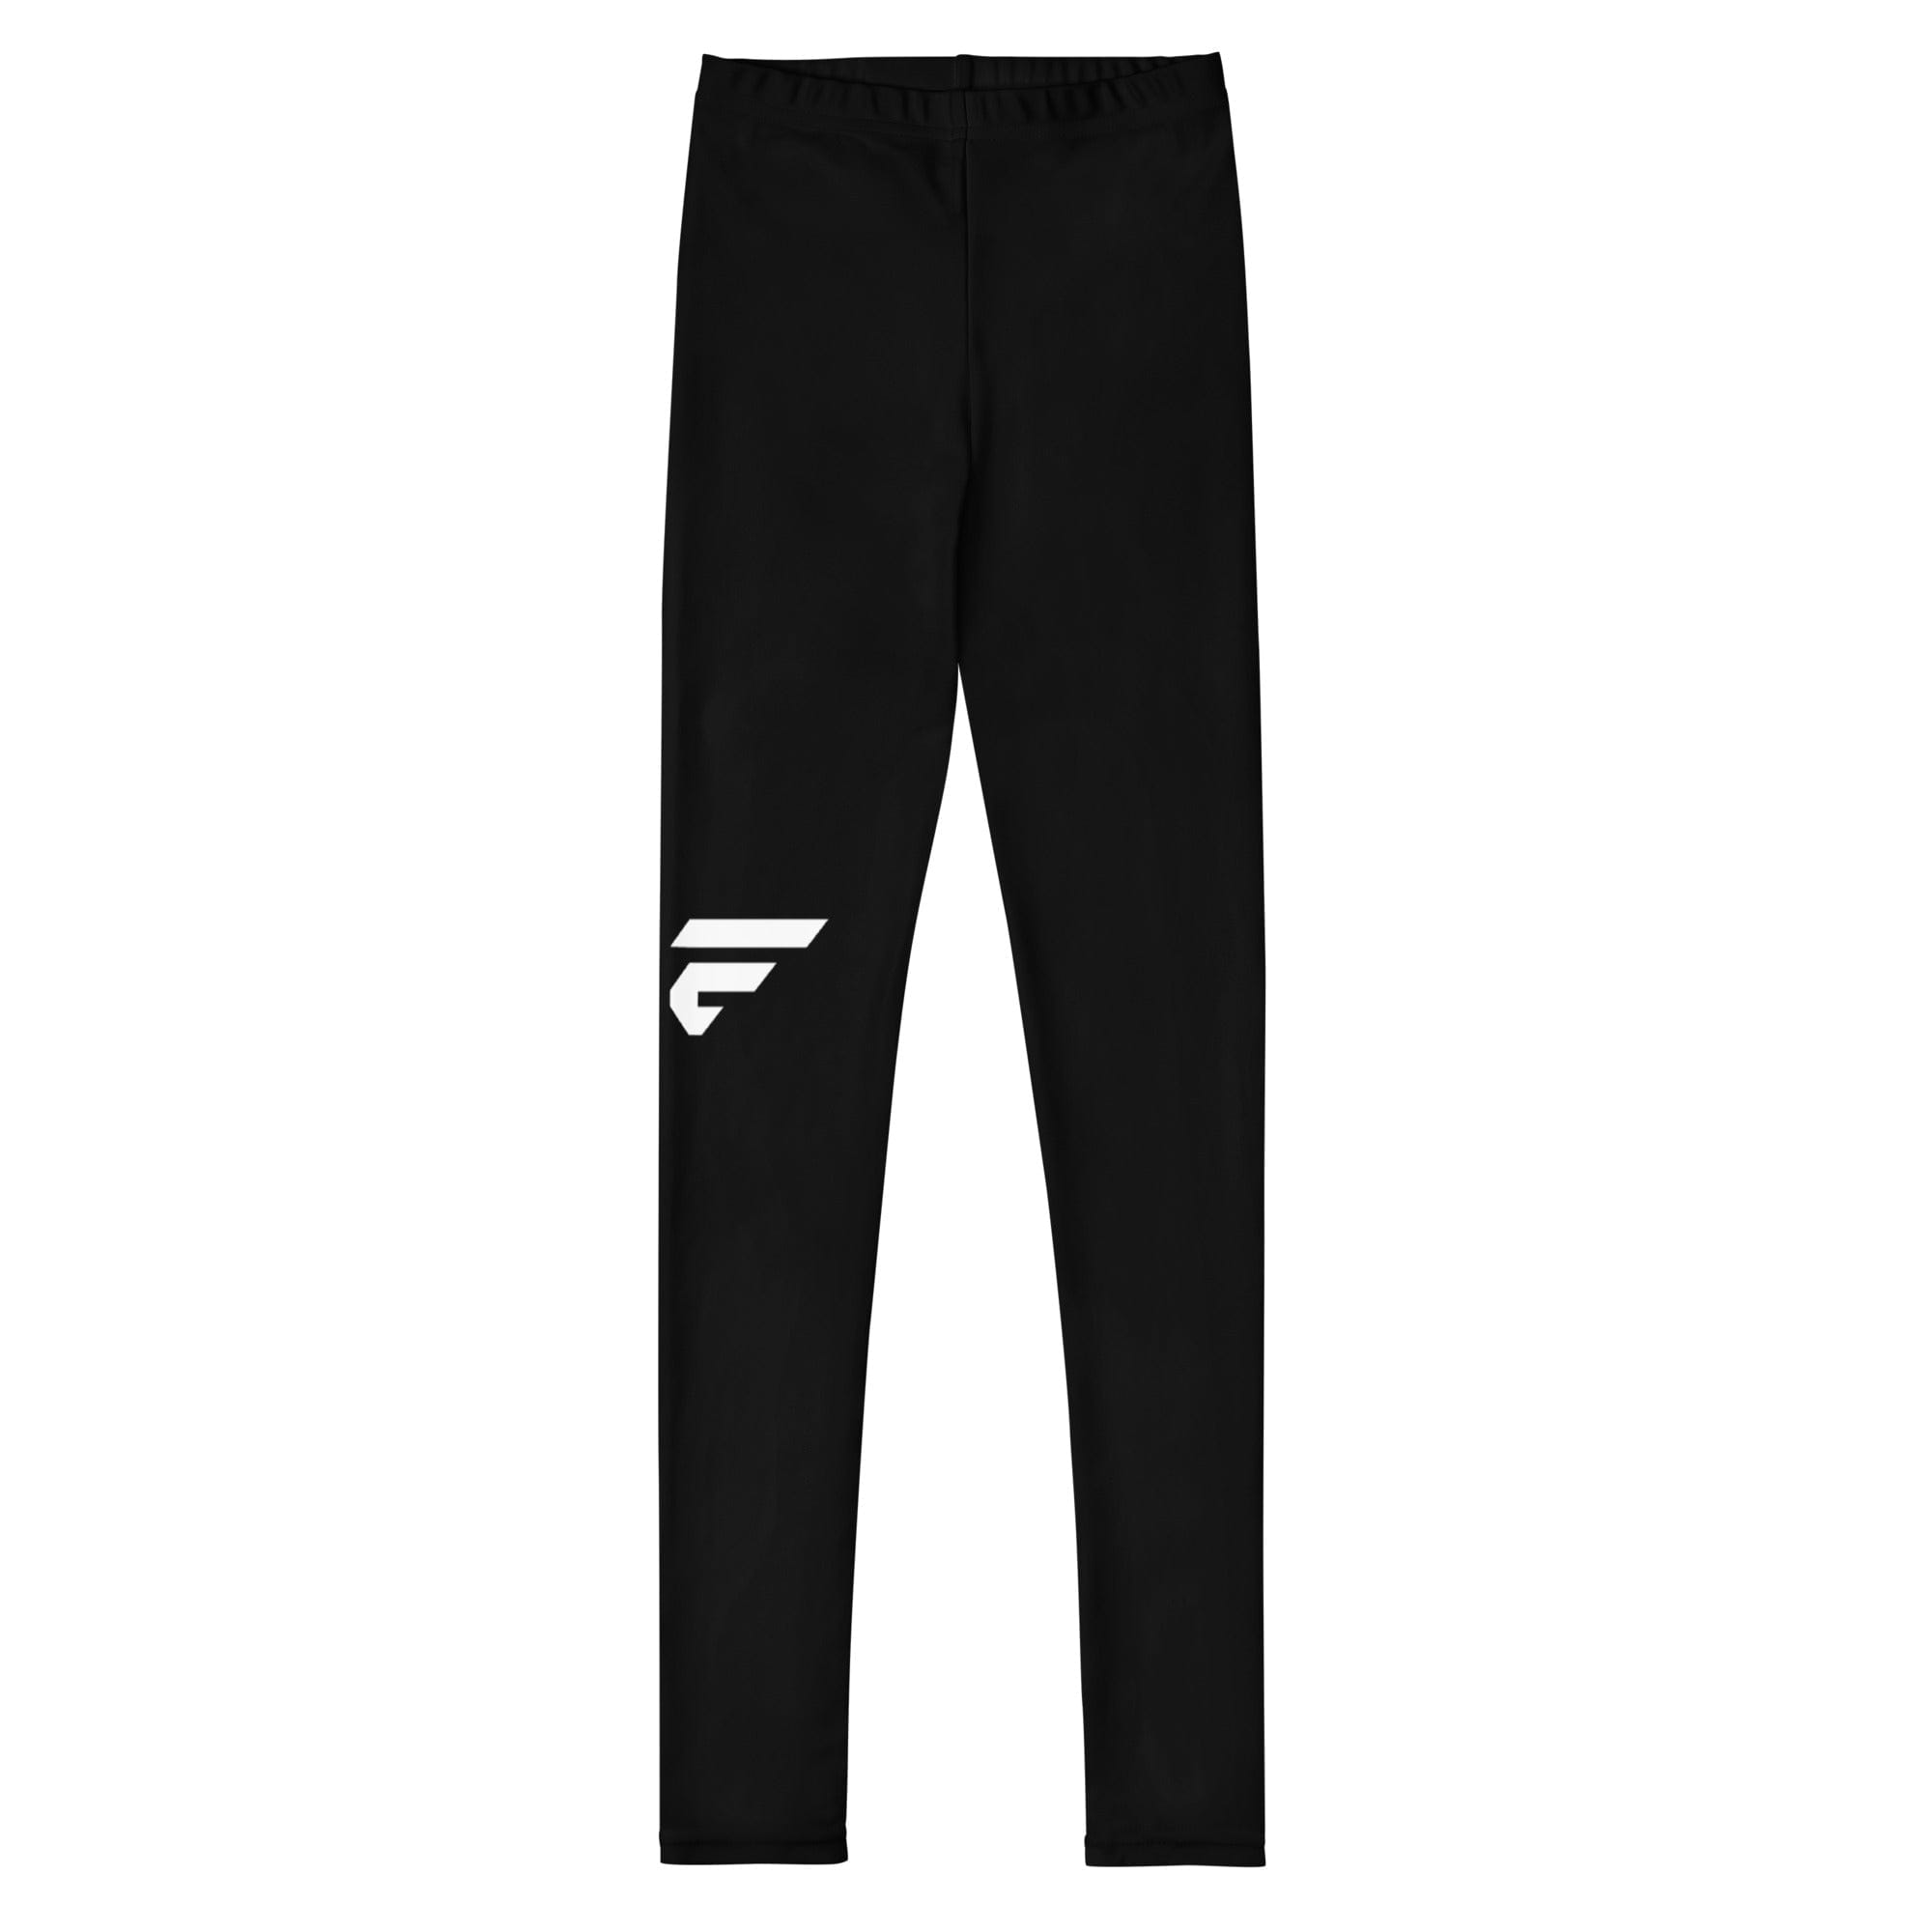 Youth leggings in black with white Fire Cornhole F logo